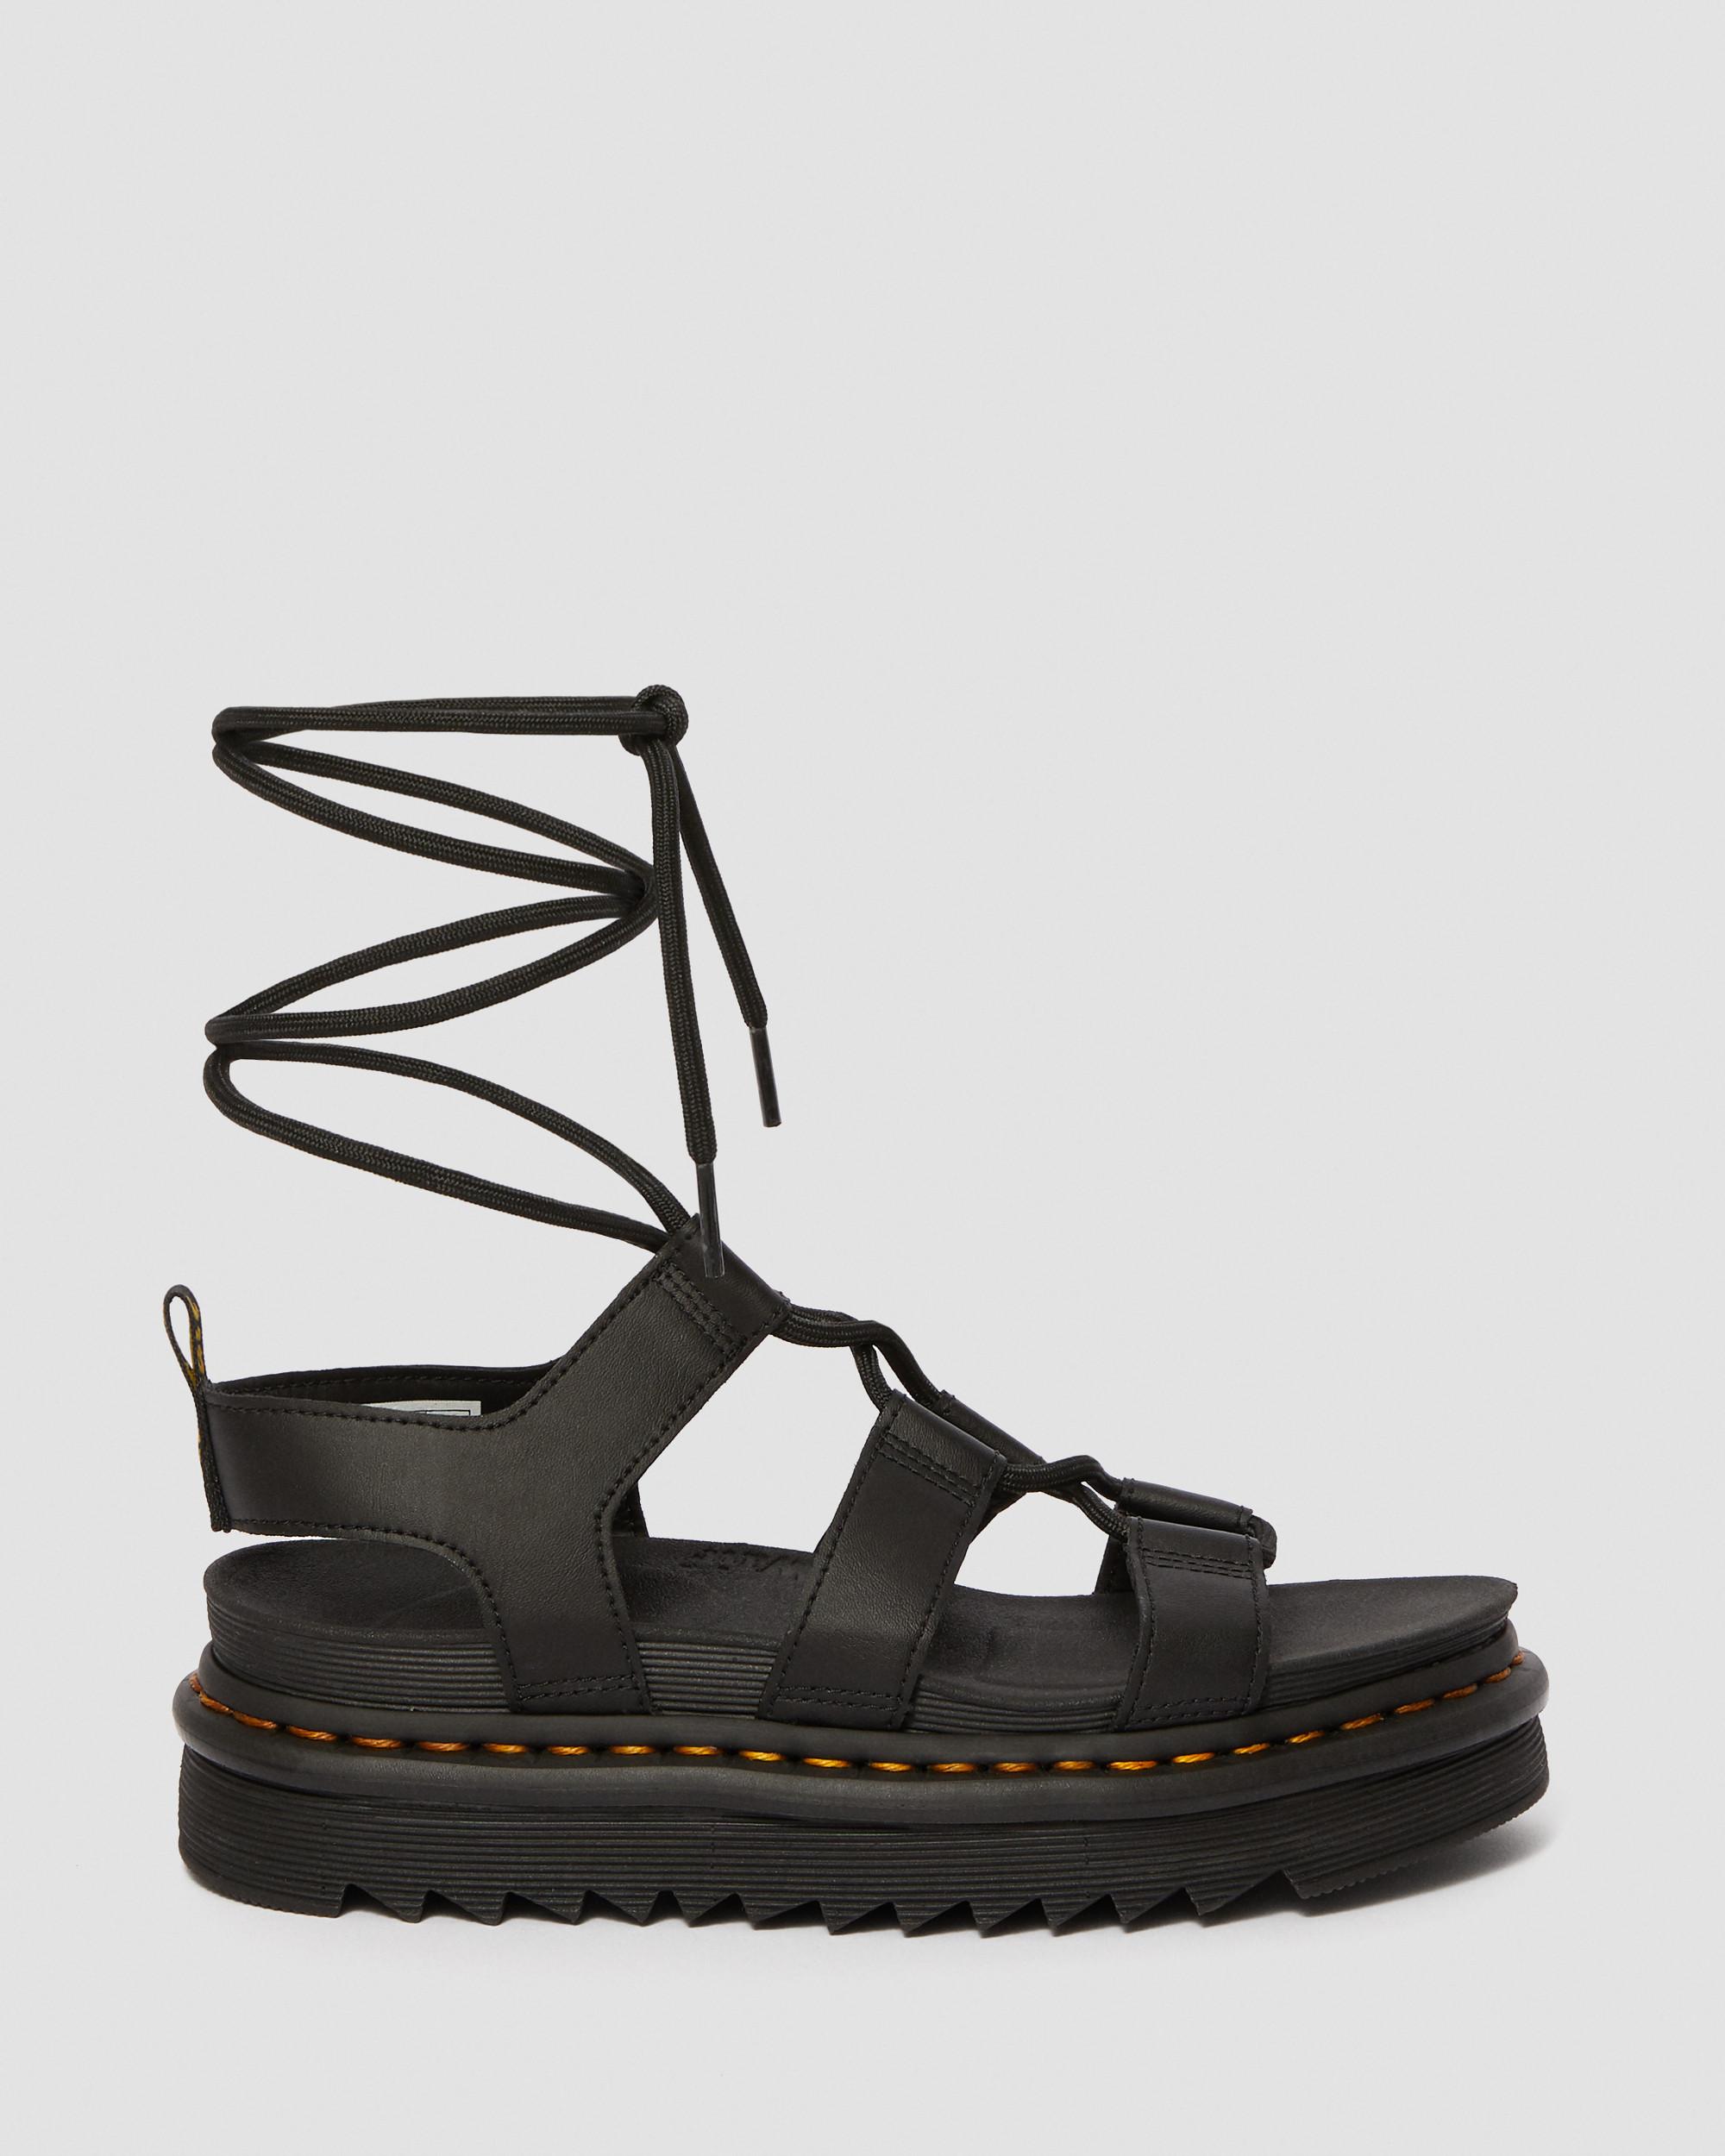 Nartilla Hydro Leather Lace Up Gladiator SandalsNartilla Hydro Leather Lace Up Gladiator Sandals Dr. Martens